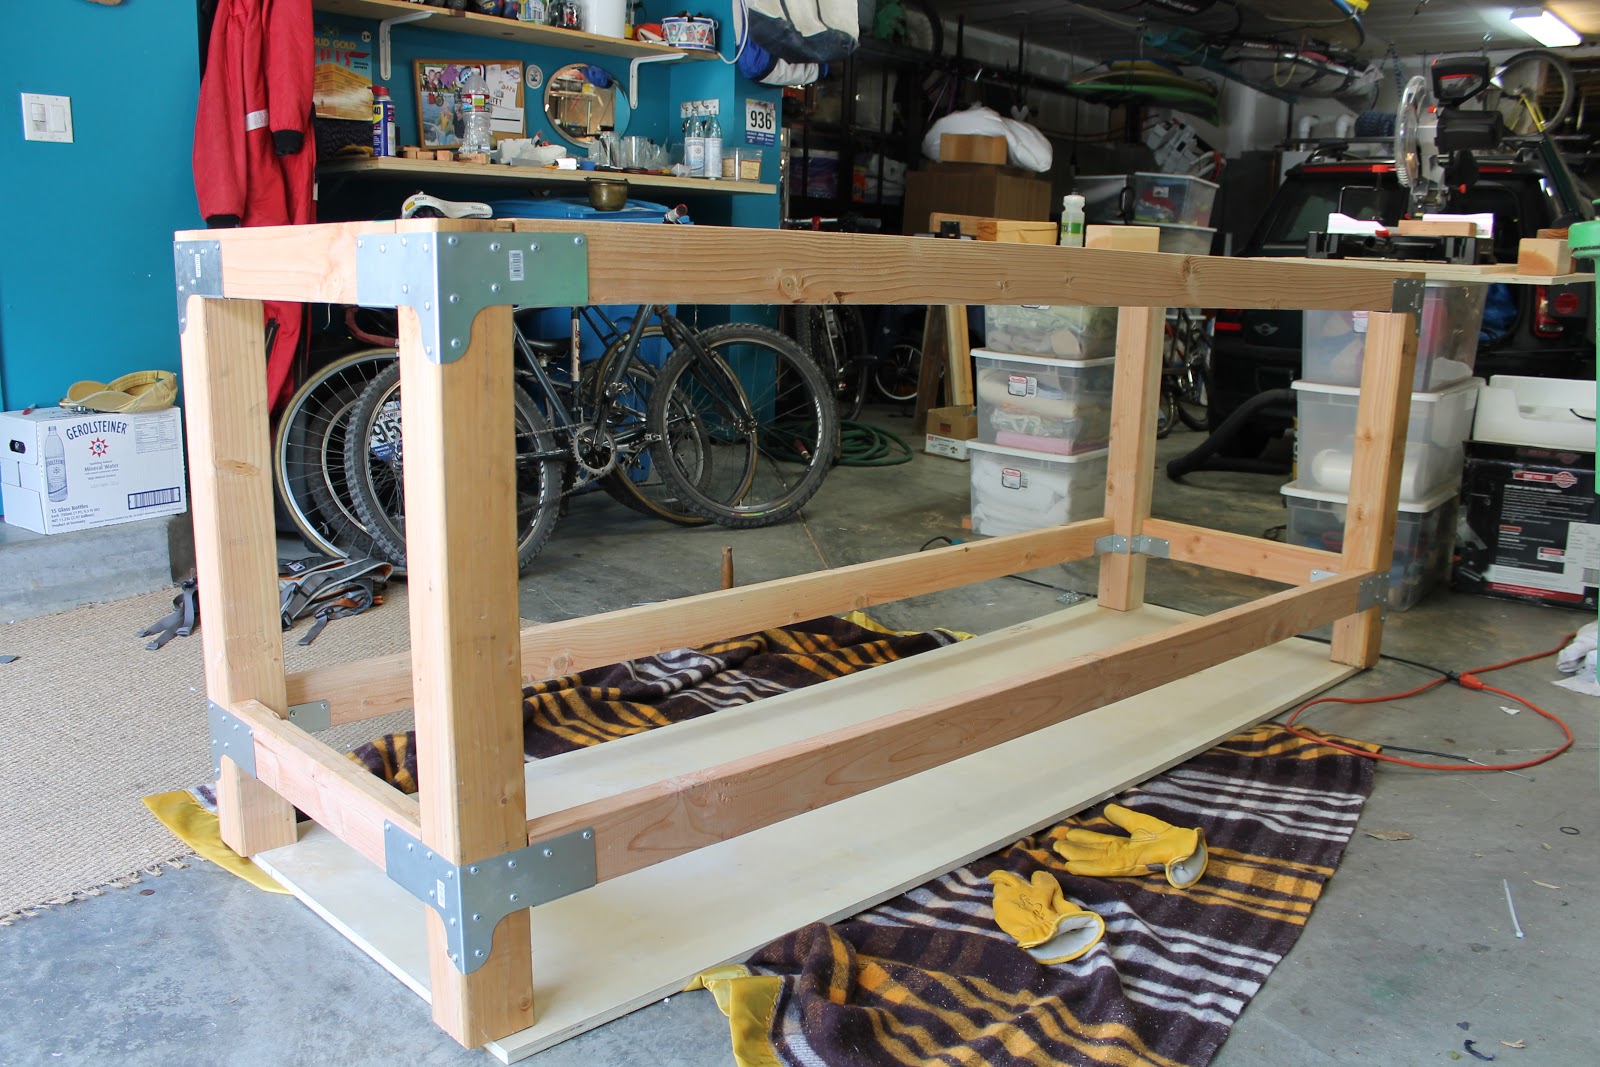 Diy Garage Workbench Plans The workbench is made up of